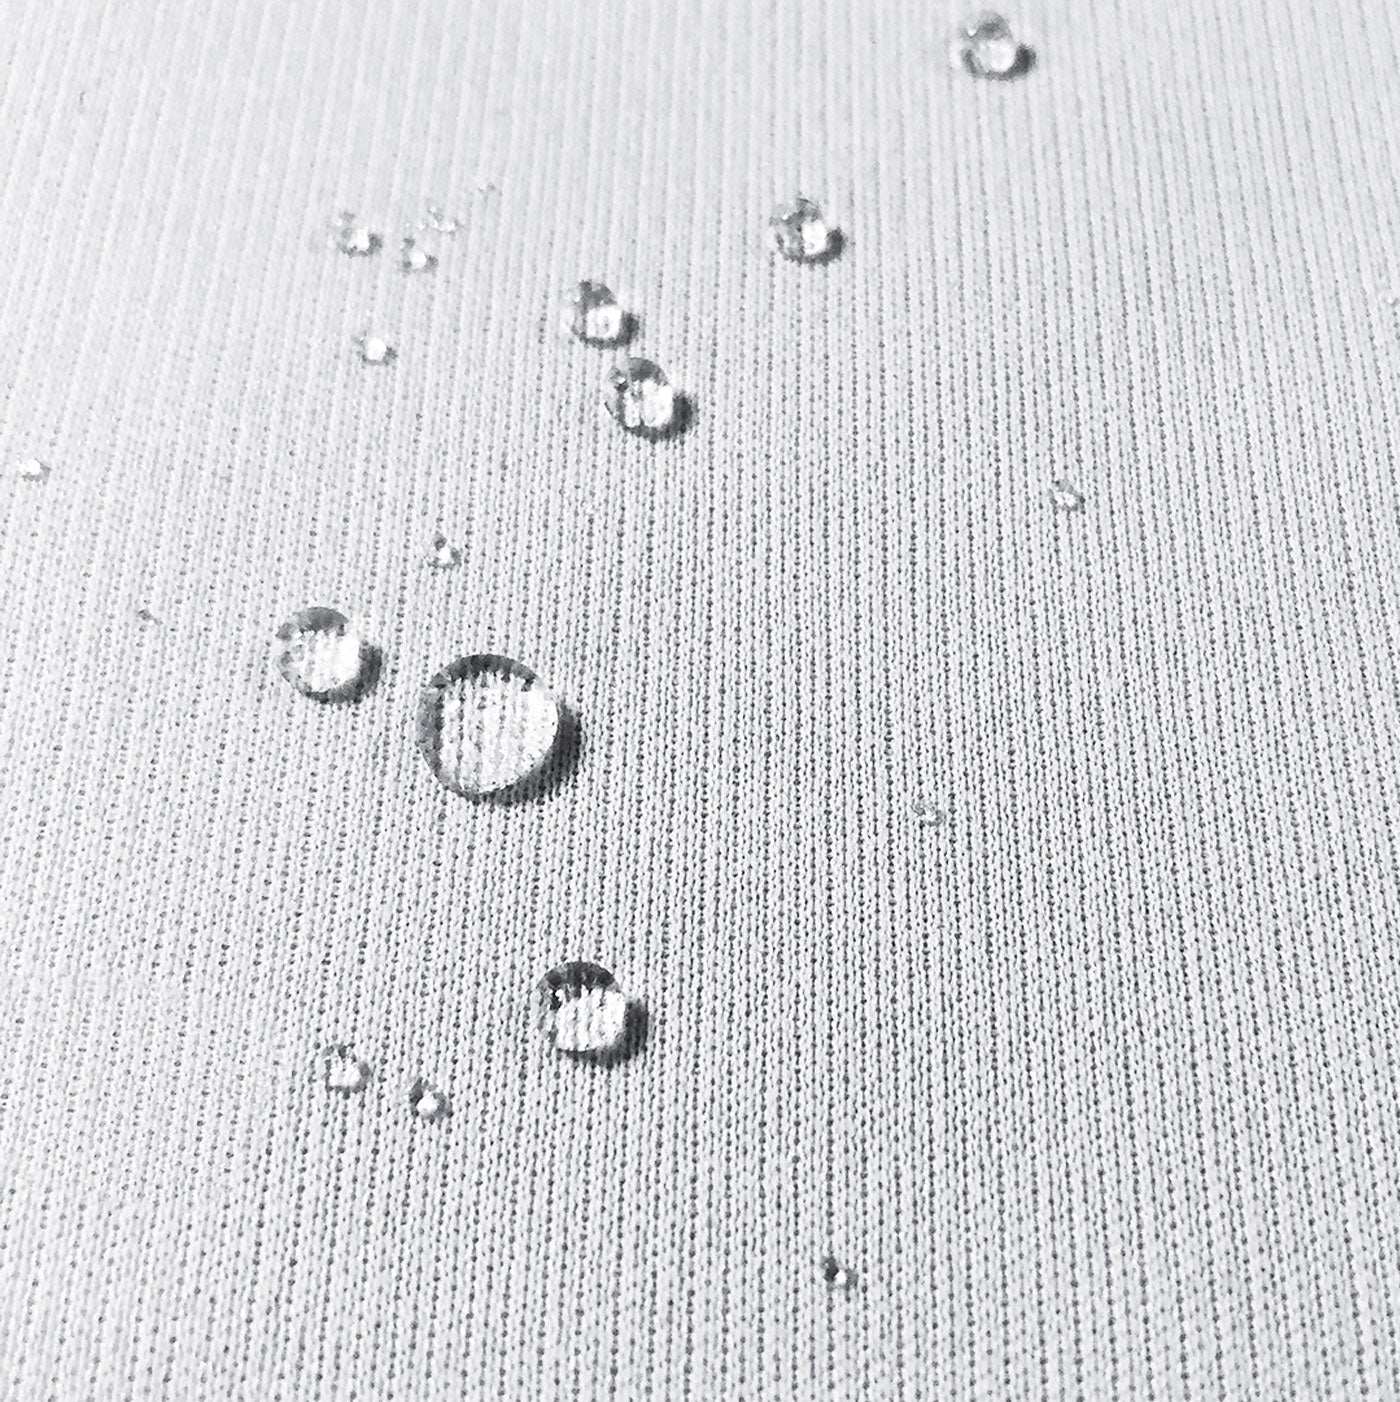 Image of white protector fabric with water droplets